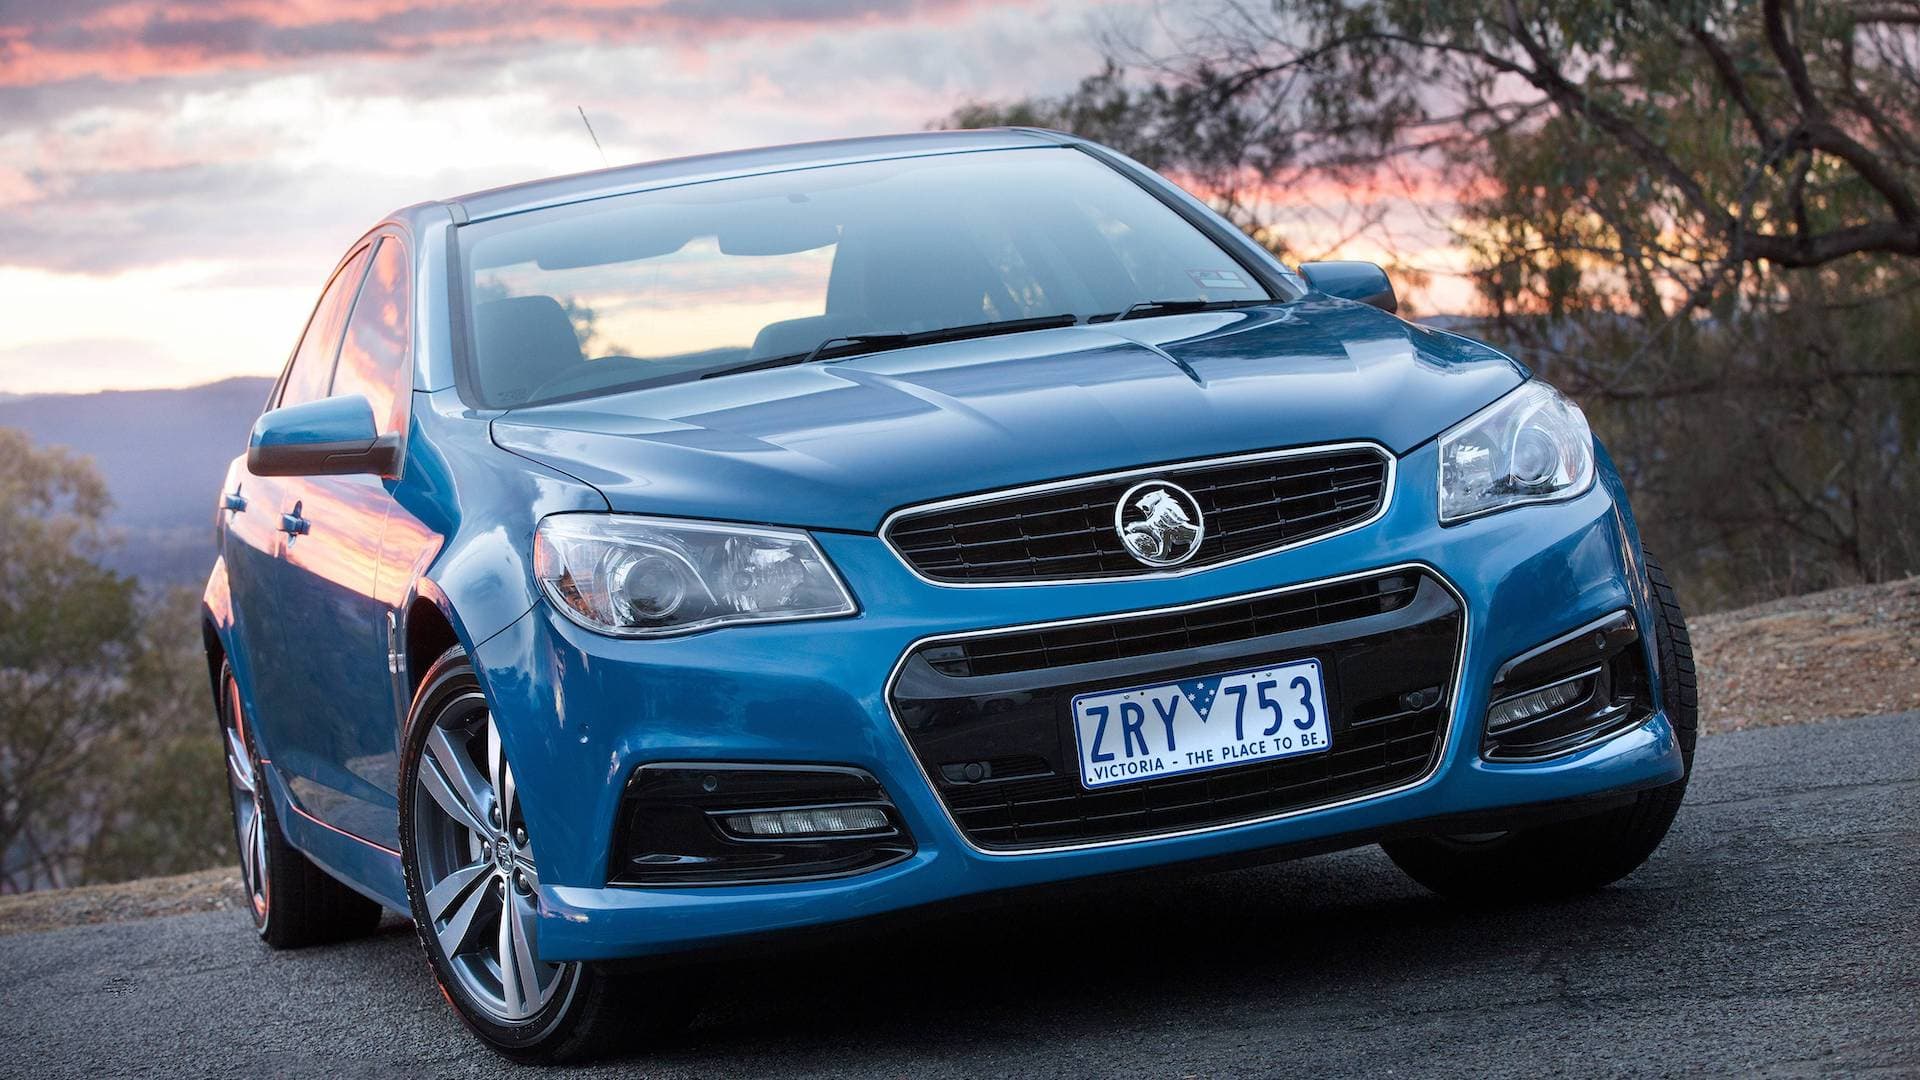 Australia’s Holden Commodore Finally Bites the Dust in 2020, Race Cars Will Live on